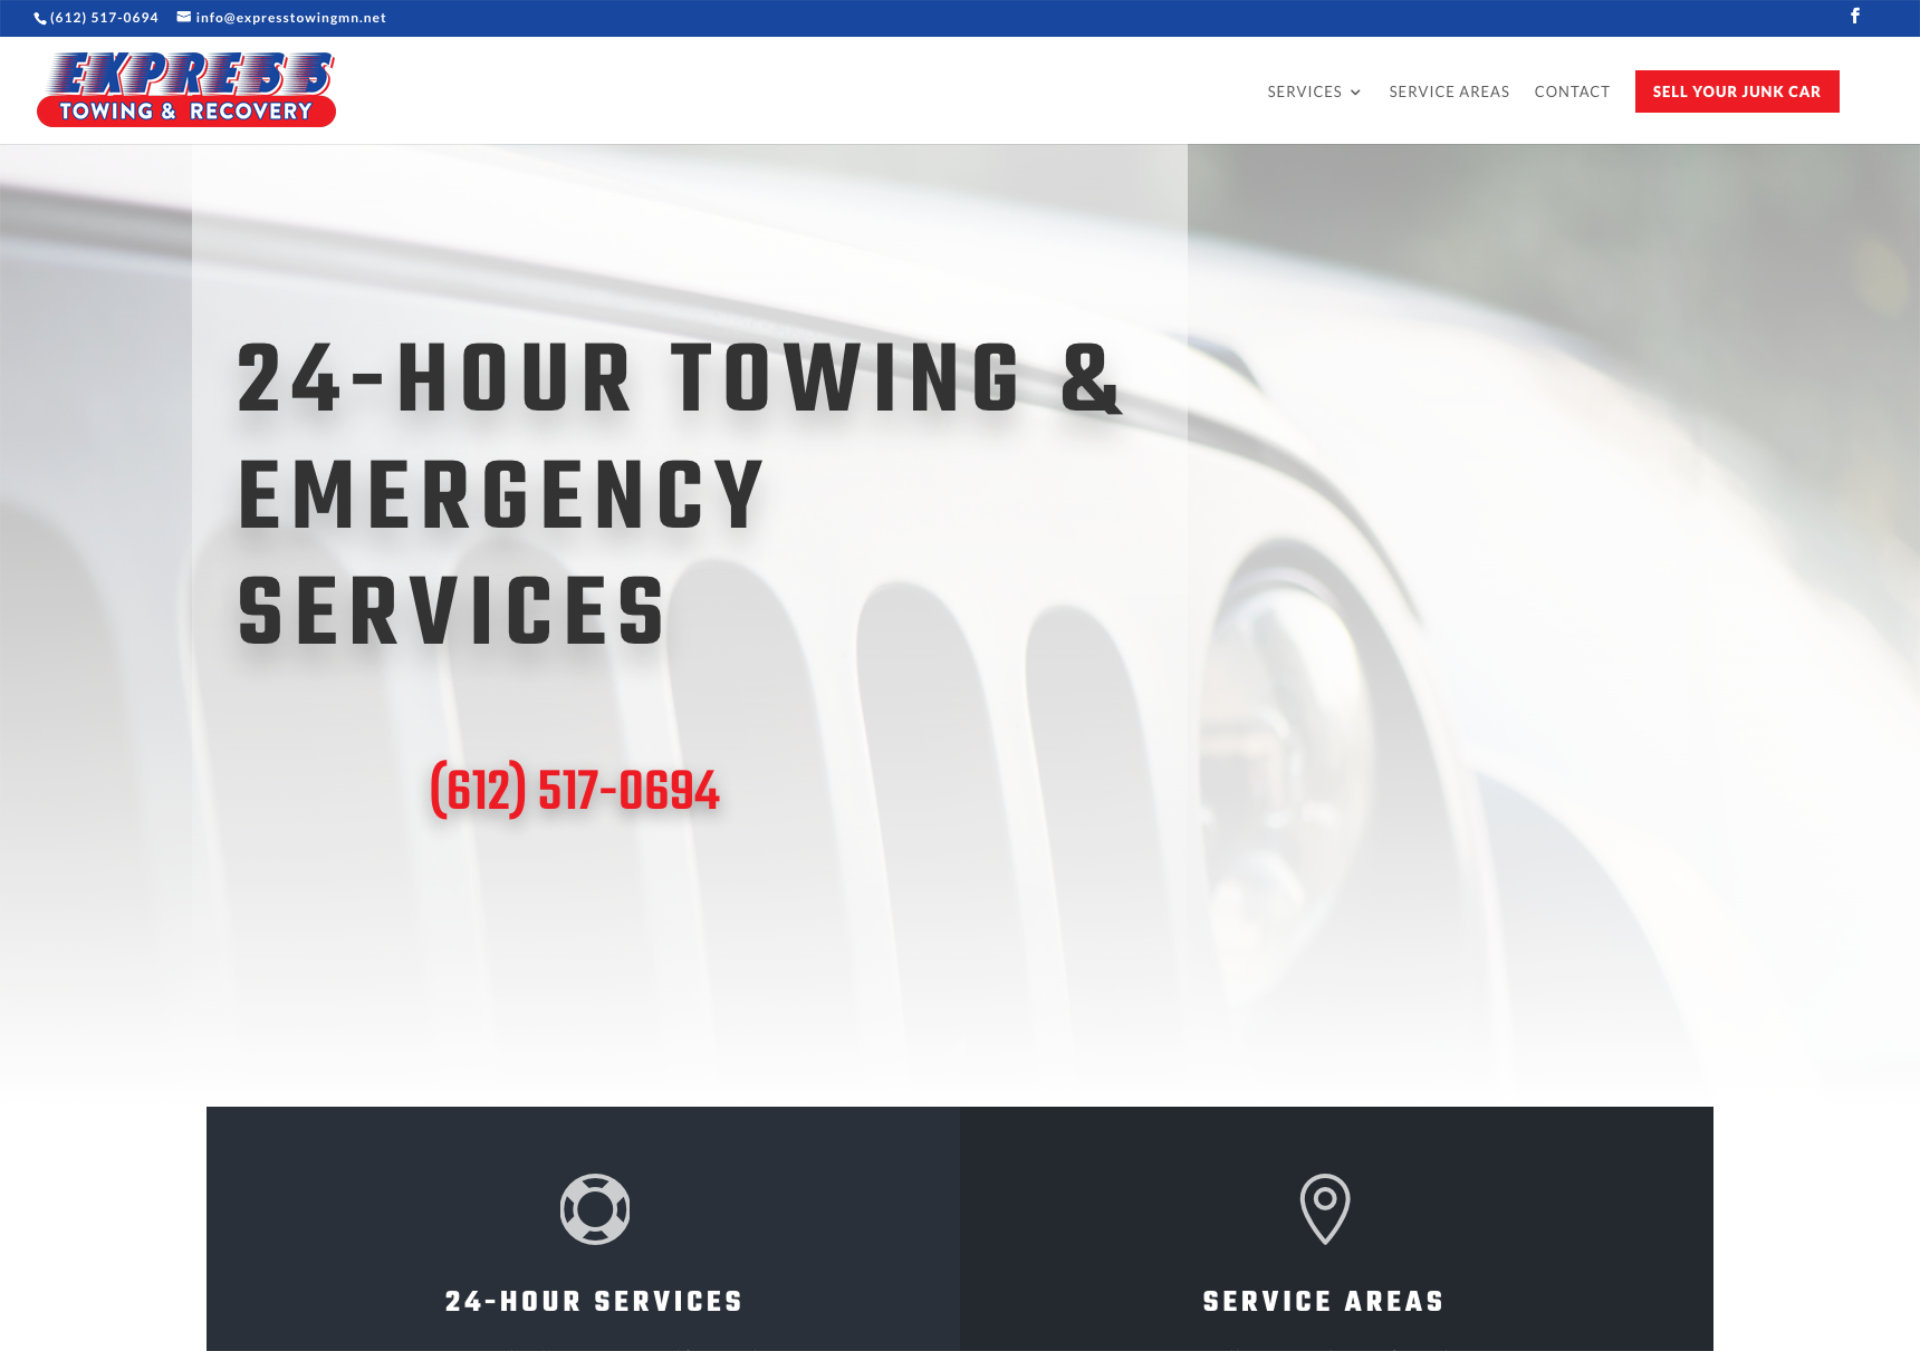 Express-Towing-Recovery-Twin-Cities-24-7-Towing-Vehicle-Services